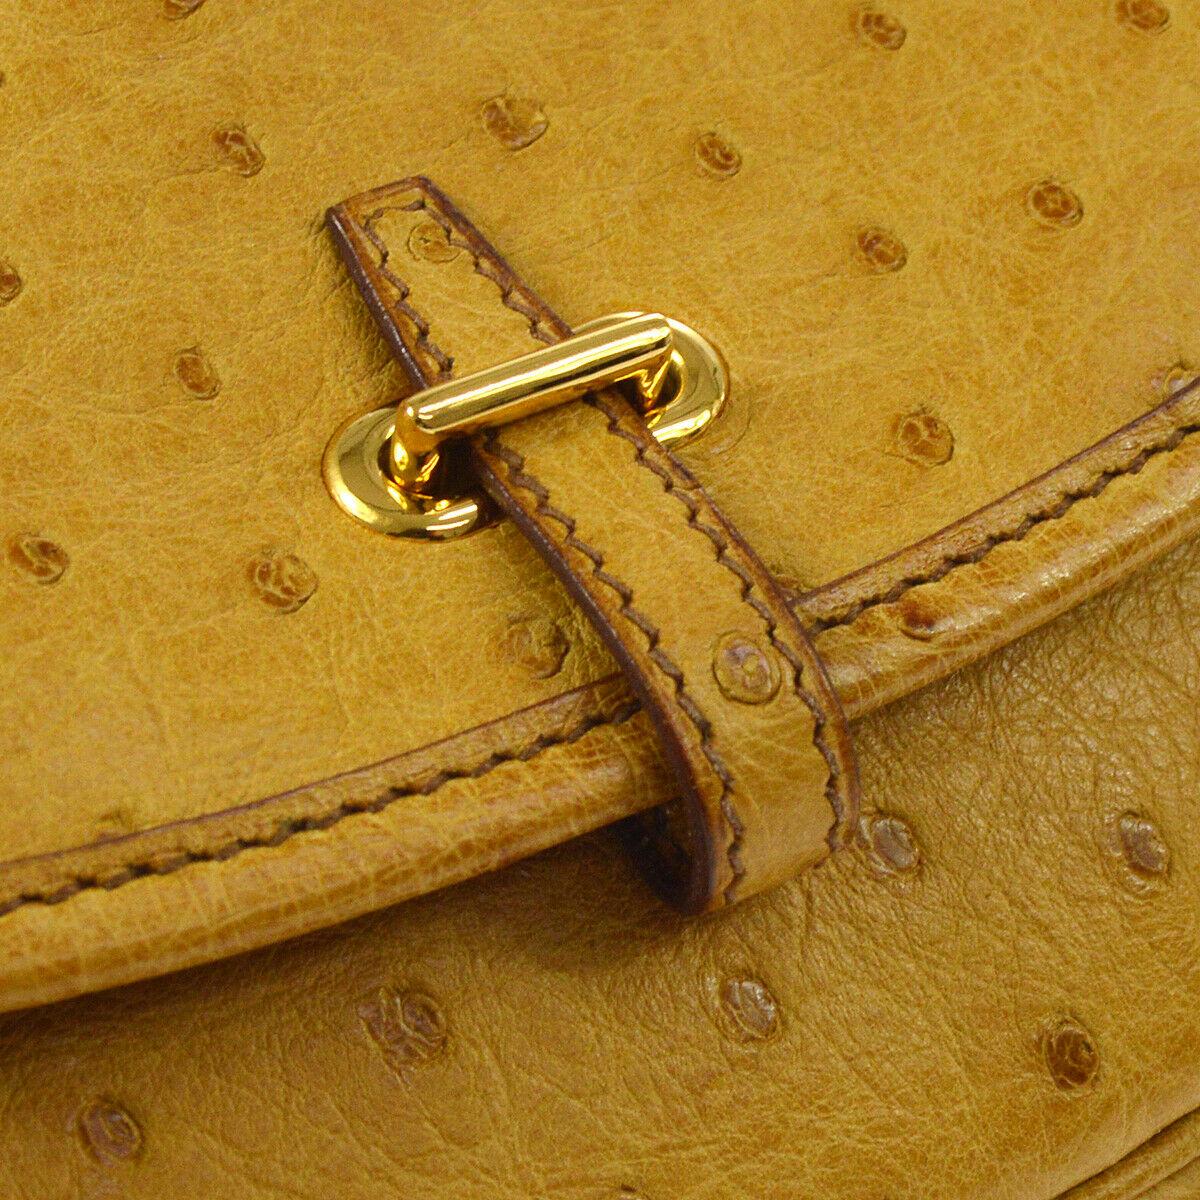 Hermes Rare Mustard Ostrich Leather Gold Small Mini Shoulder Flap Bag

Ostrich
Gold tone hardware 
Leather lining
Fold in buckle closure
Date code present
Made in France
Adjustable shoulder strap drop 19-20